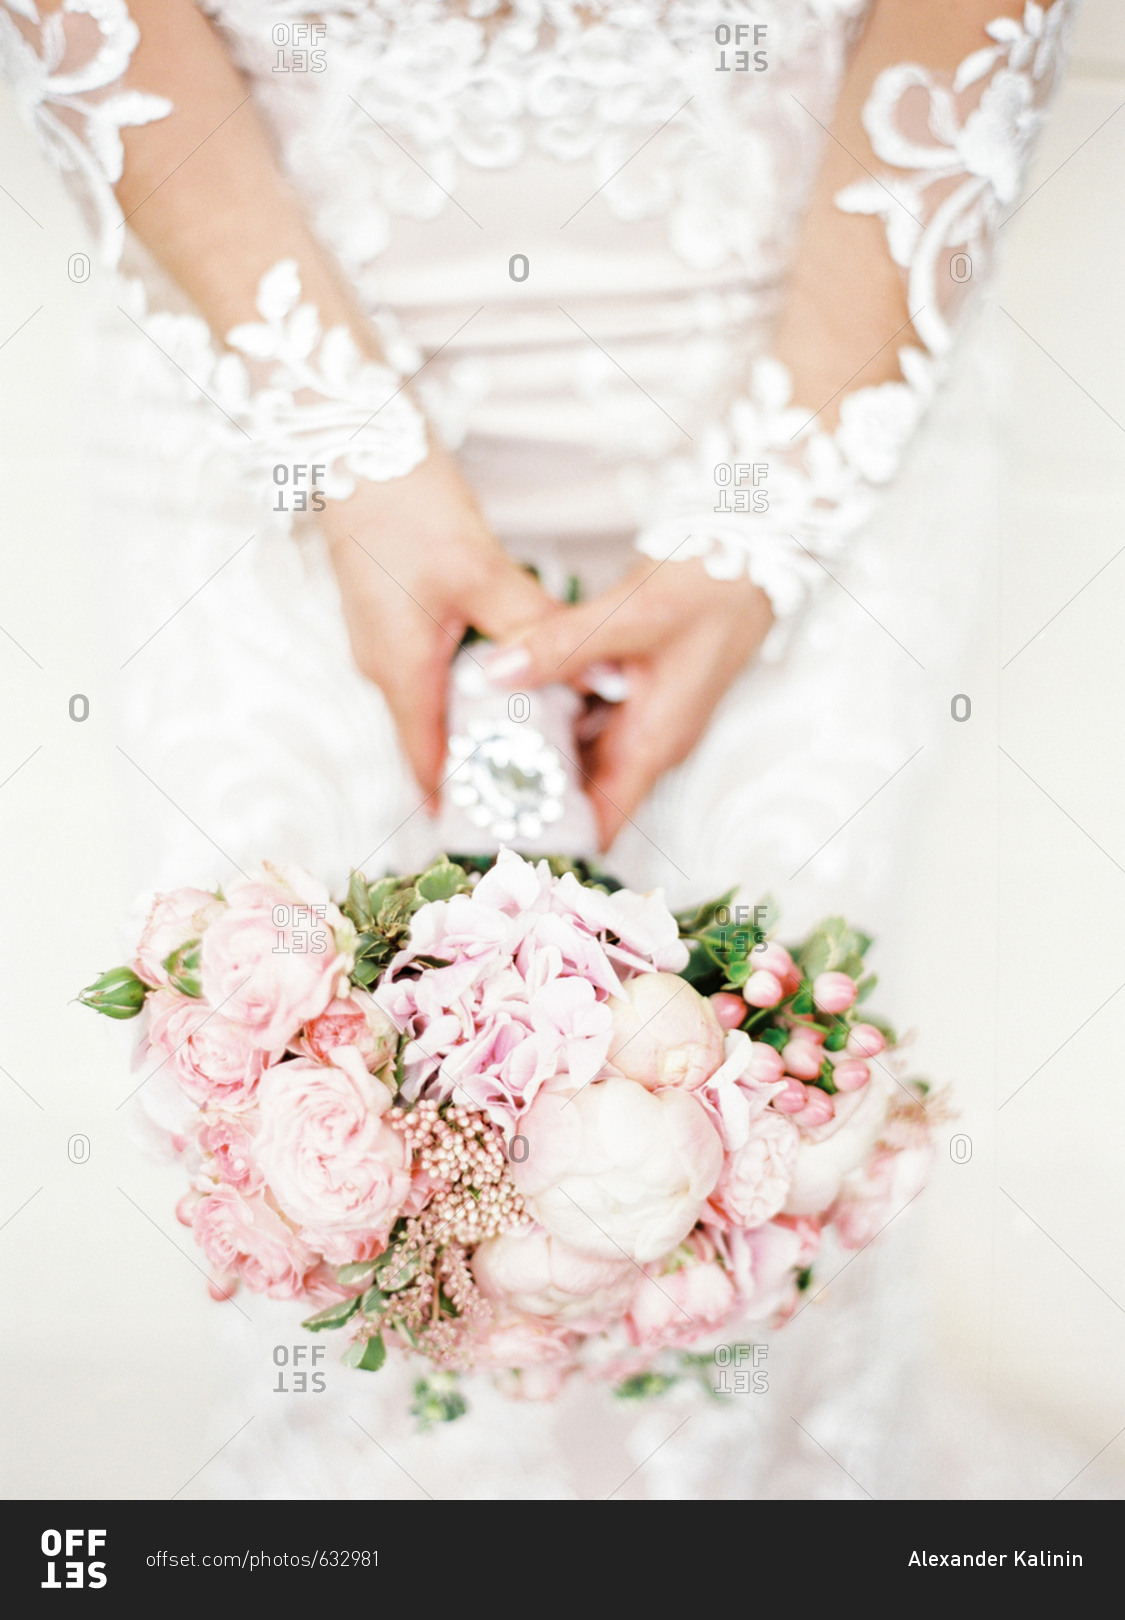 Bride holding wedding bouquet with pink roses